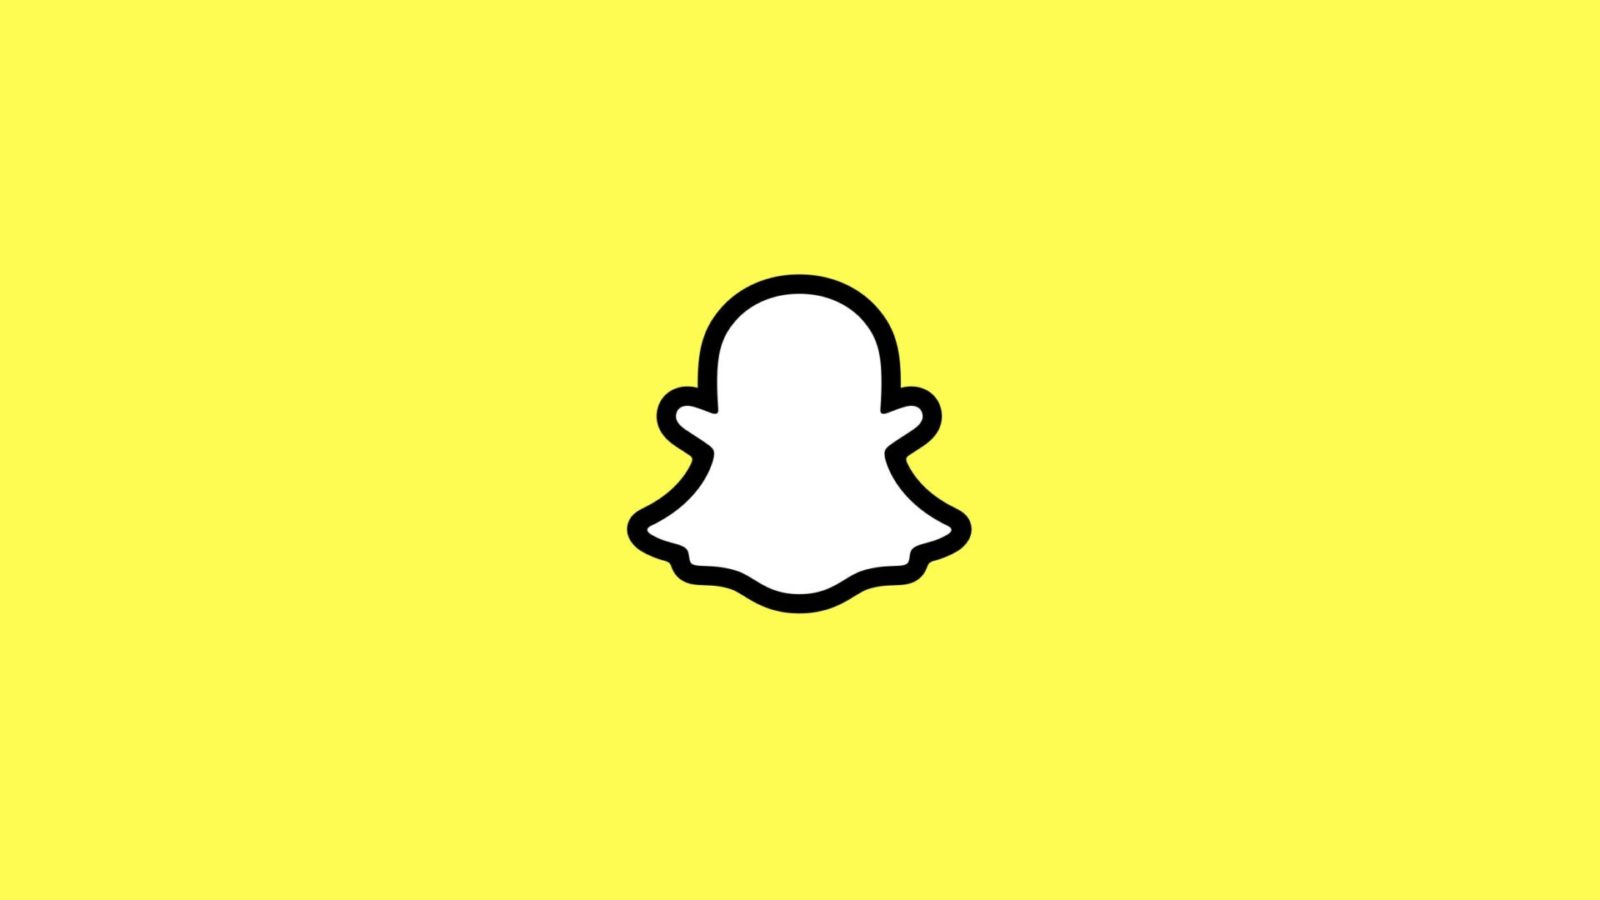 Snapchat adds new ways for creators to earn cash rewards